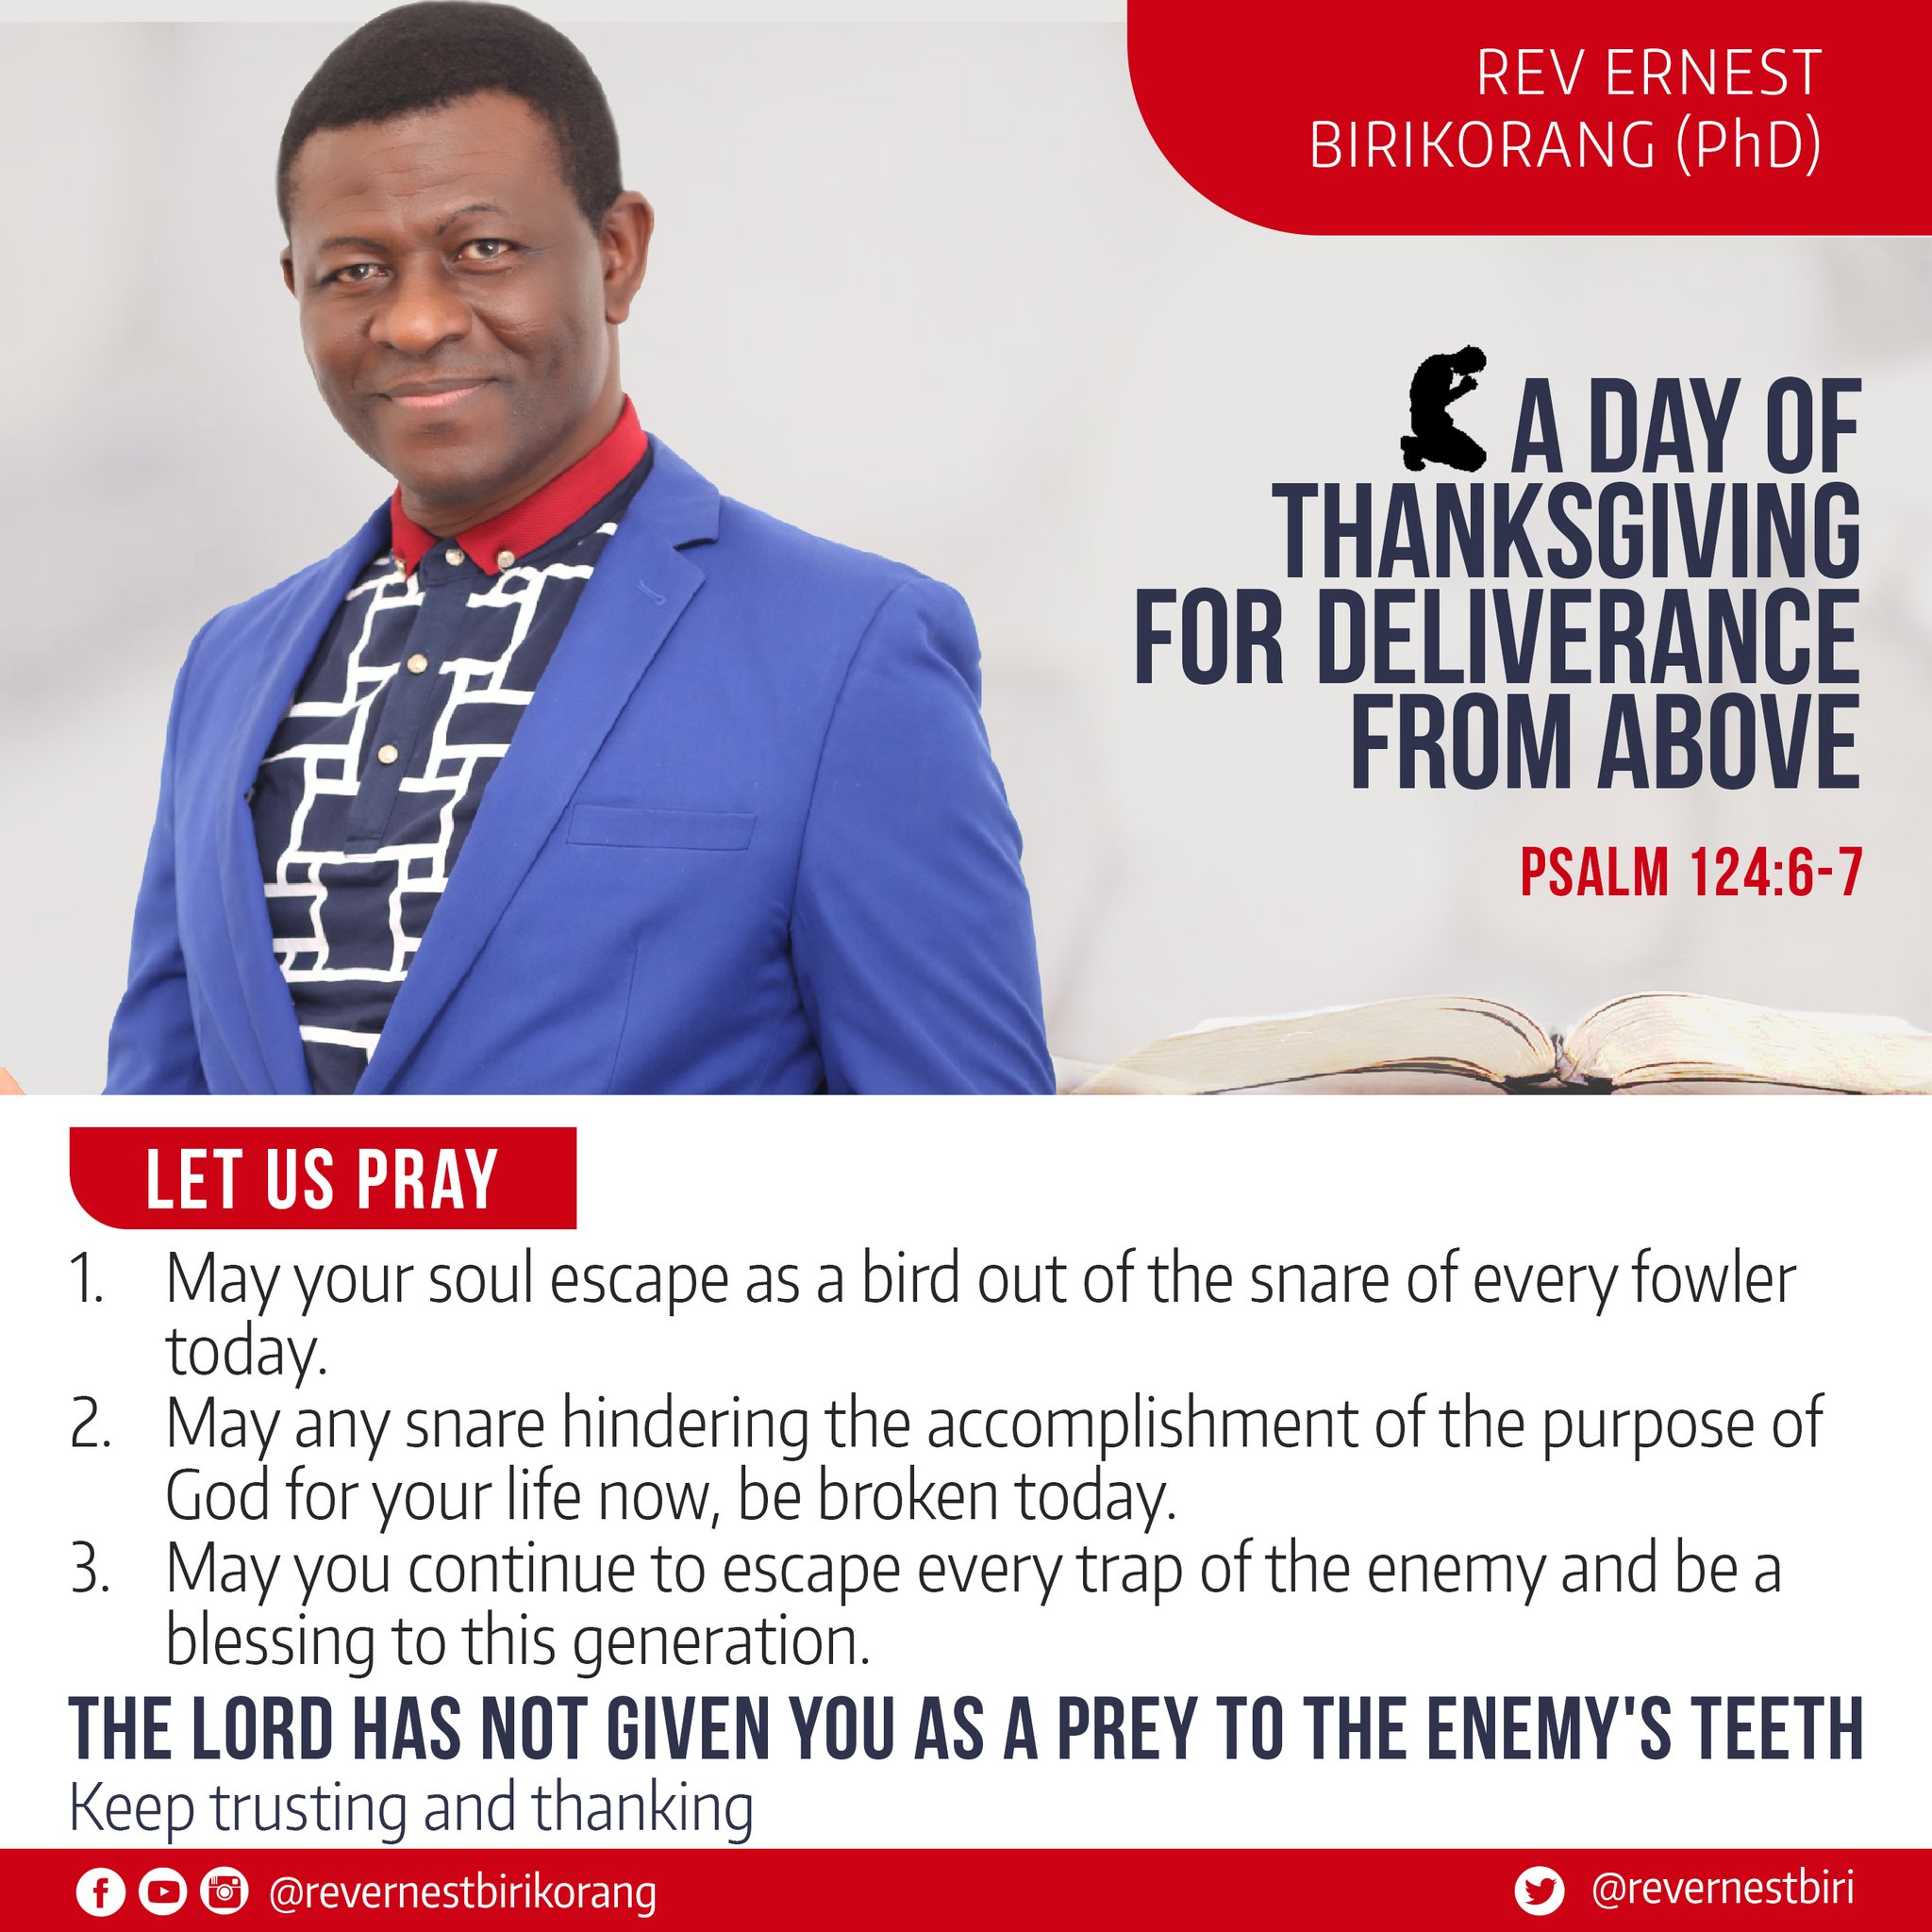 REV ERNEST BIRIKORANG (PhD) A DAY OF THANKSGIVING FOR DELIVERANCE FROM ABOVE PSALM 124.6-7 LET US PRAY vour soul escape a5 a bird out ofthe snare of = fowler today: 2. any snare hindering the accomplishment of the purpose of God for your life now; be broken today: 3. vou continue to escape every trap ofthe enemy and be a blessing to this generation: THE LORD HAS NOT GIVEN YOU AS A PREY TO THE ENEMY'S TEETH Keep trusting and thanking @revernestbirikorang @revernestbiri May - every May May `